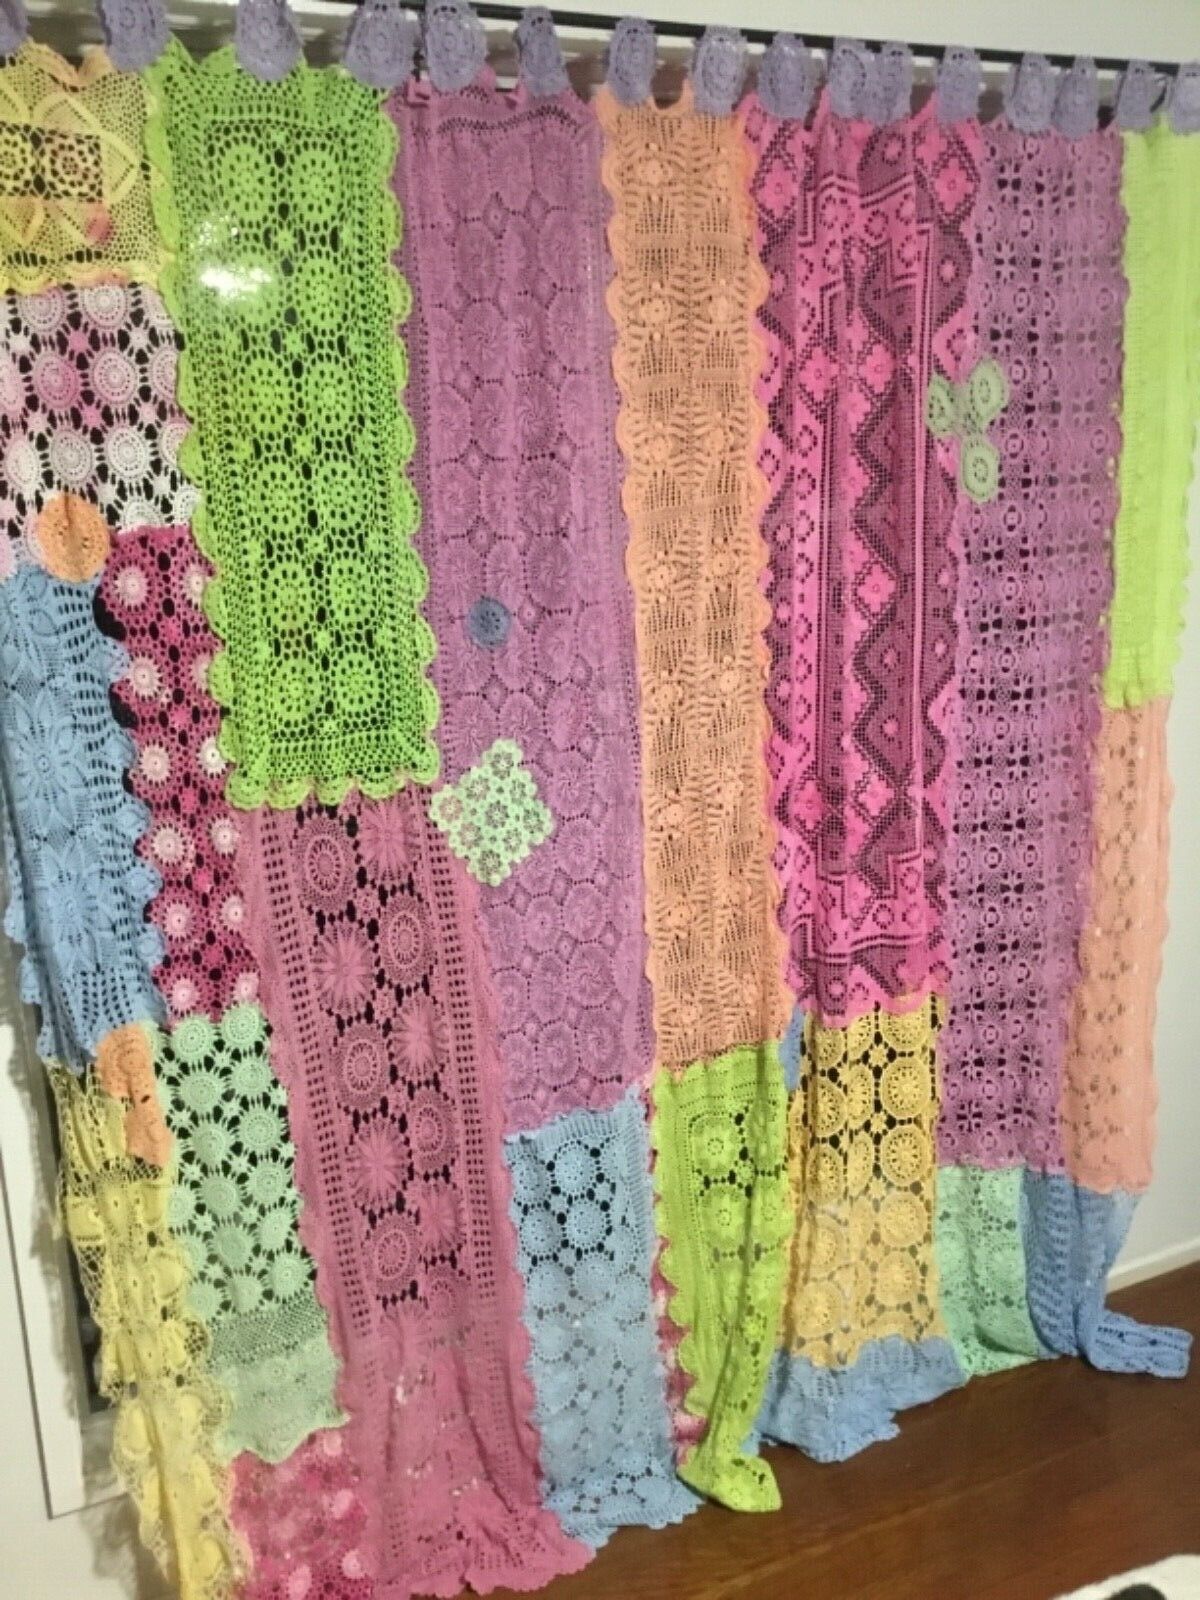 MULTICOLOURED MAGNOLIA PEARL STYLE VINTAGE DOILIES PATCHWORK HAND DYED CURTAIN